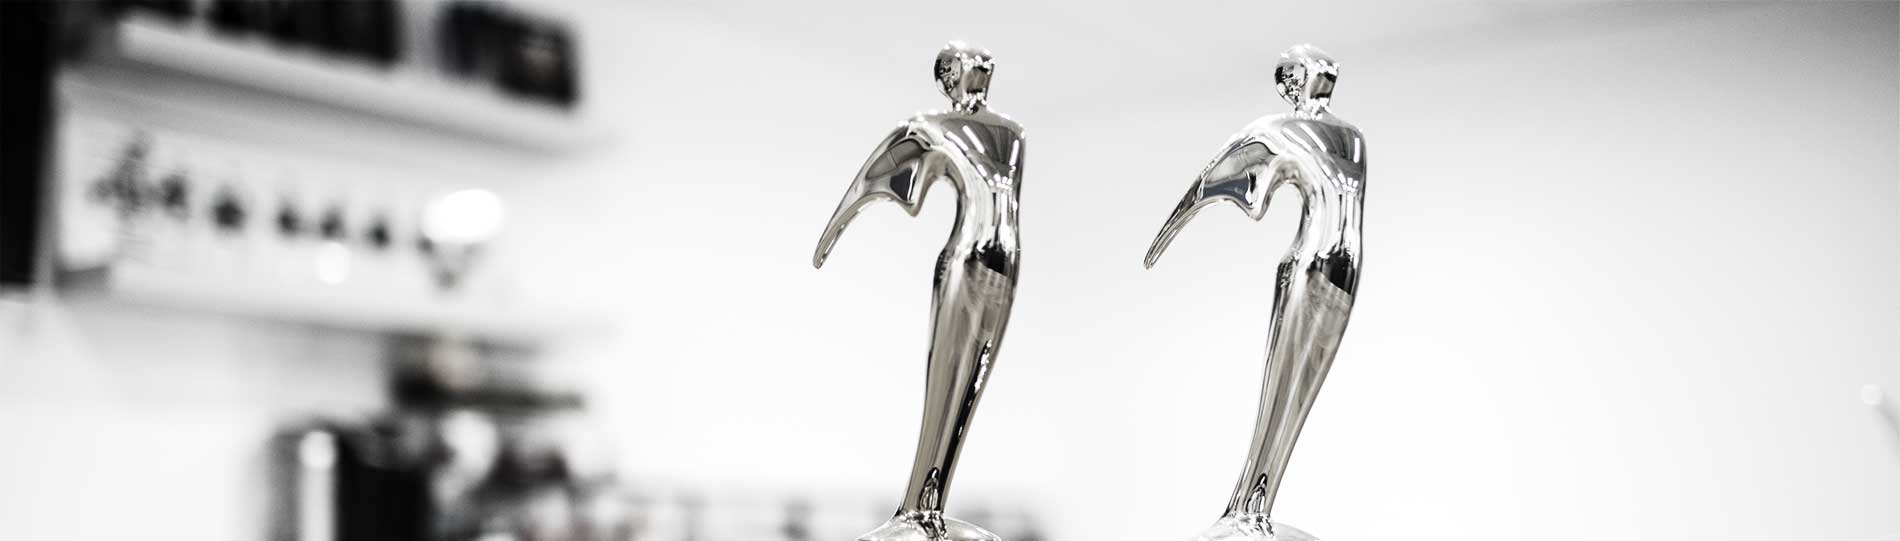 Two Telly Awards statues